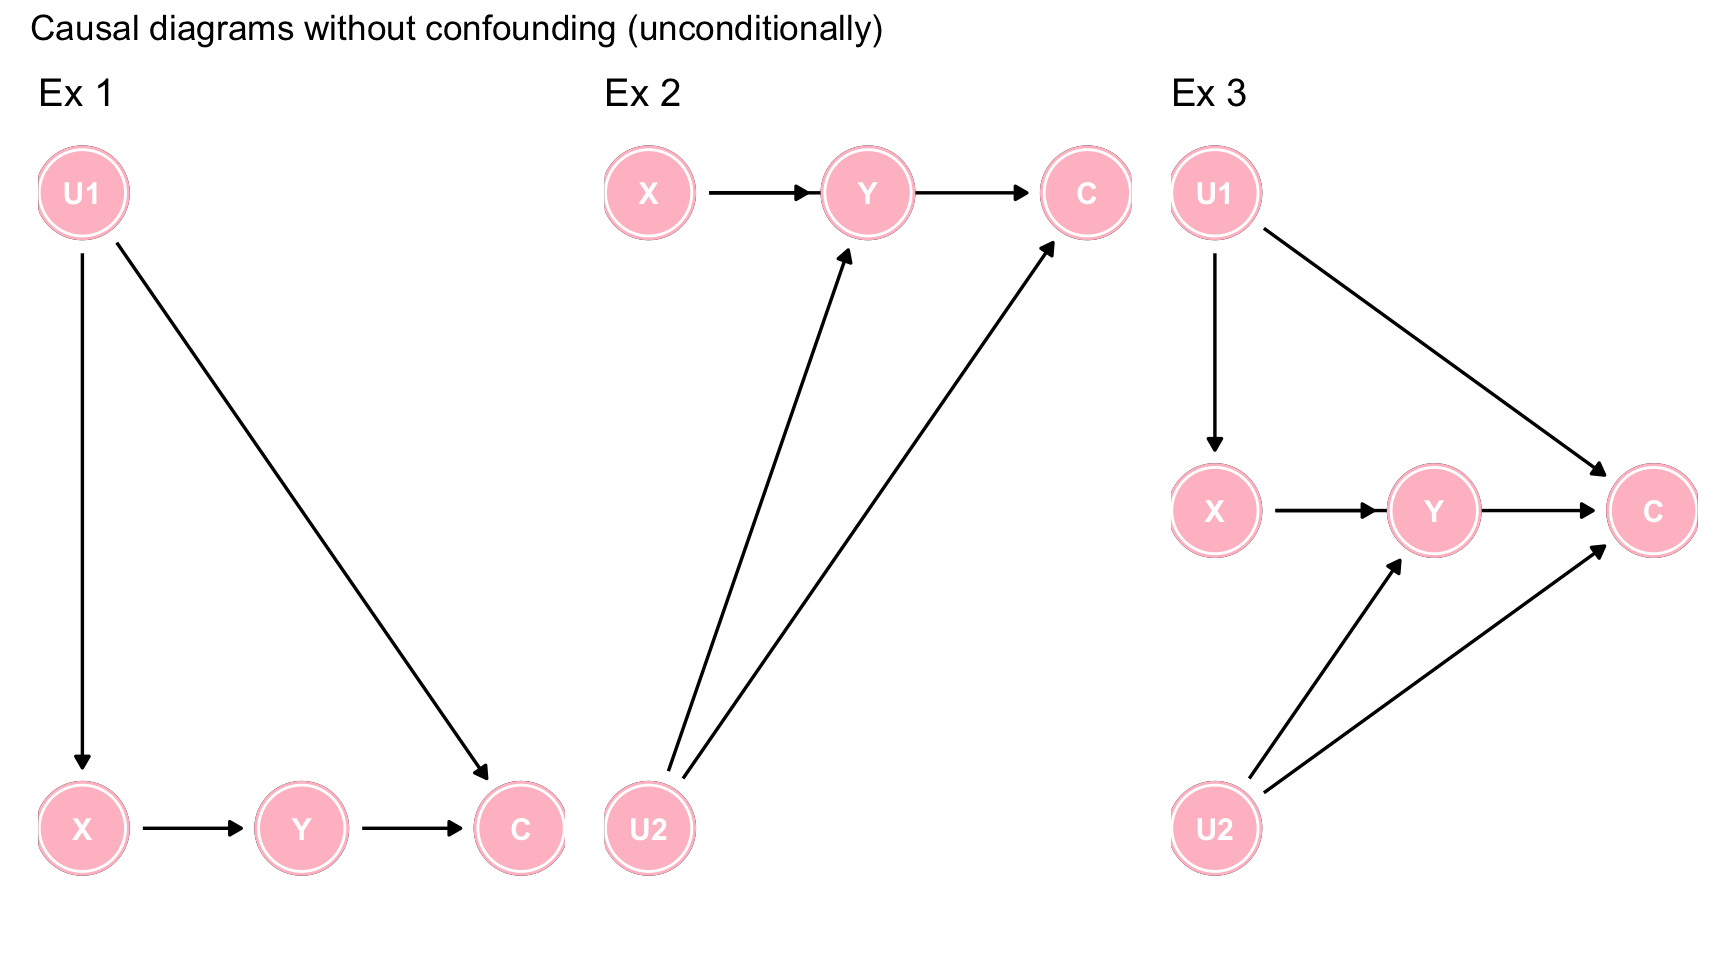 Causal diagrams without confounding (unconditionally)